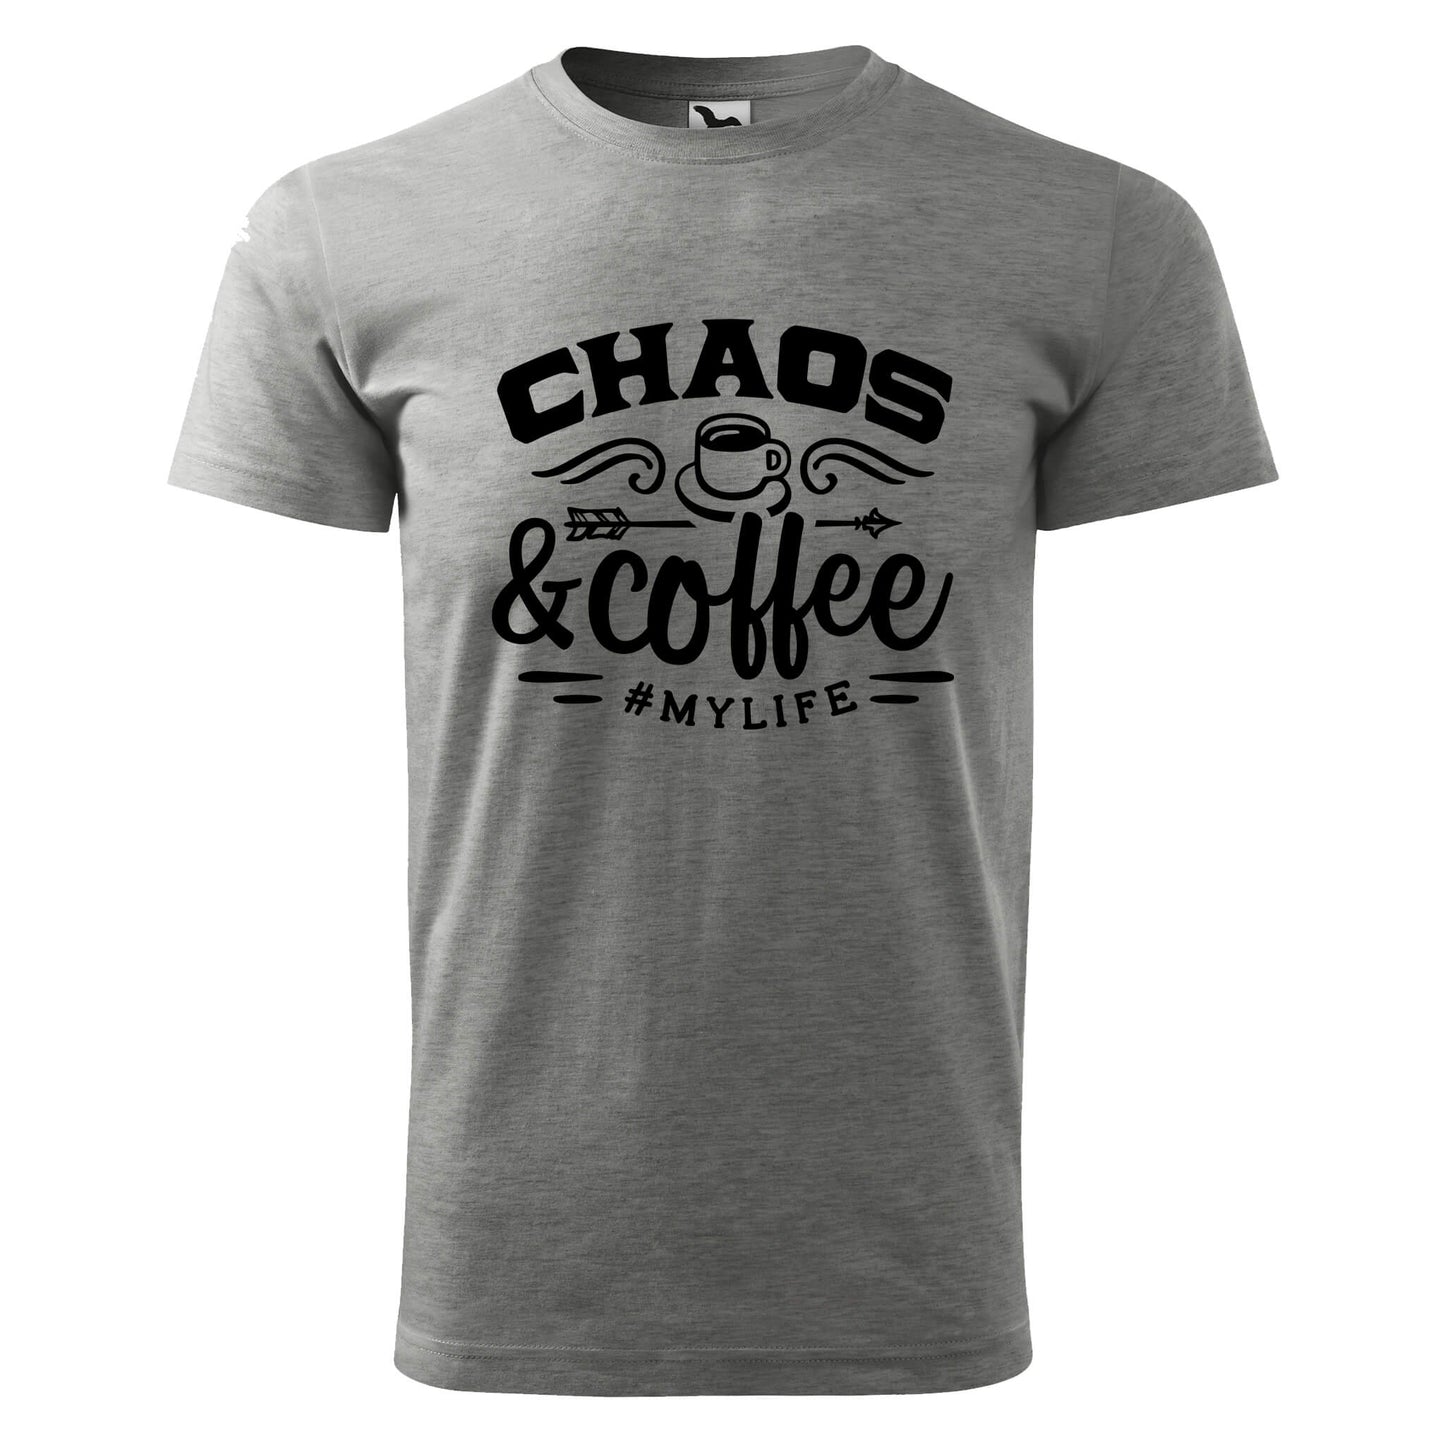 Chaos and coffee t-shirt - rvdesignprint